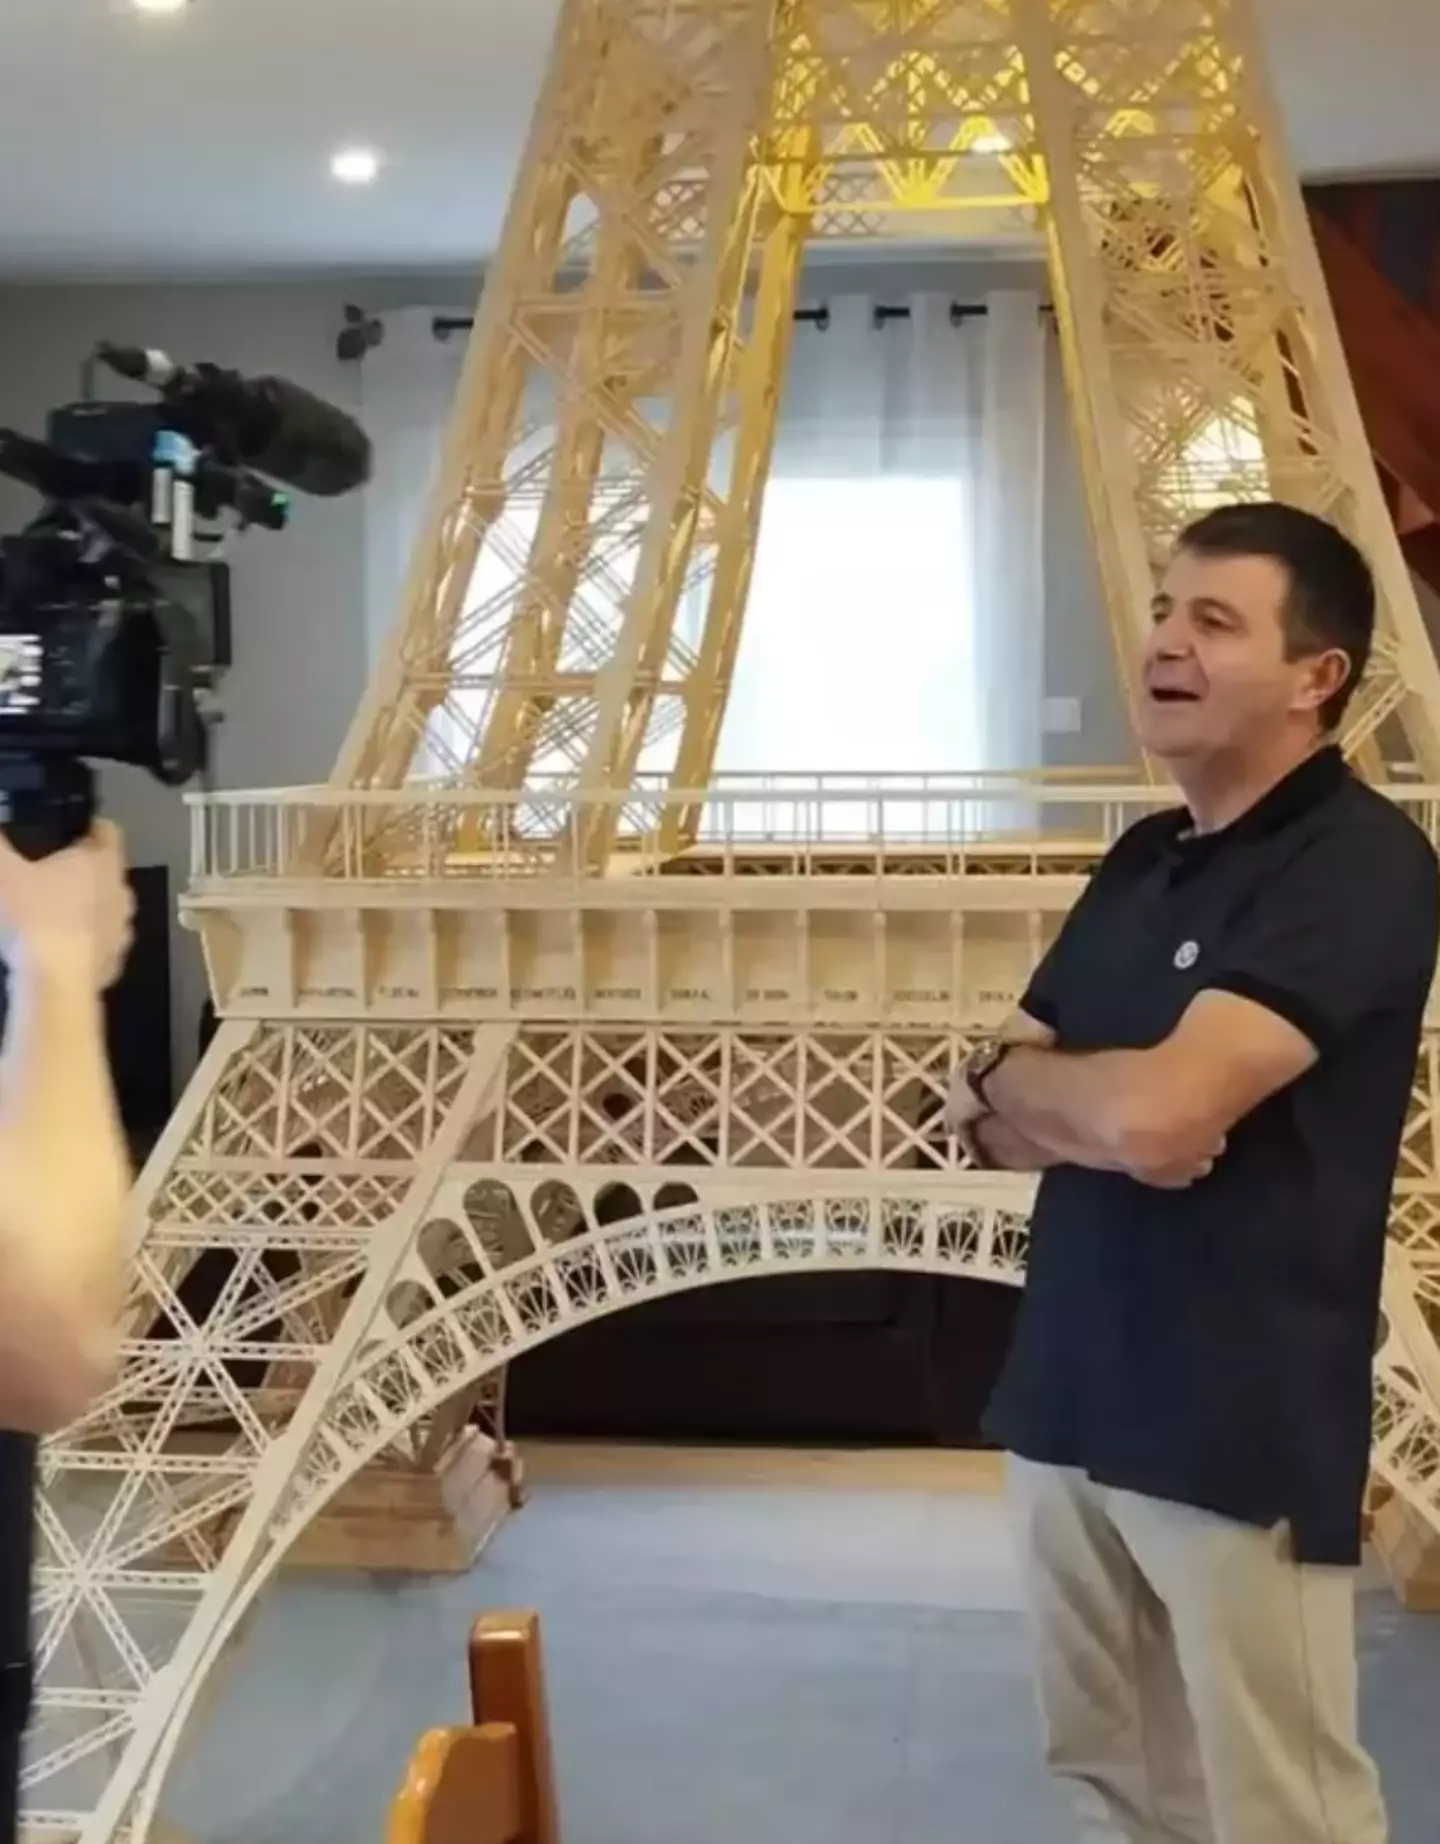 Richard Plaud showed his patriotism to his country with his own impressive entry of the Eiffel Tower.